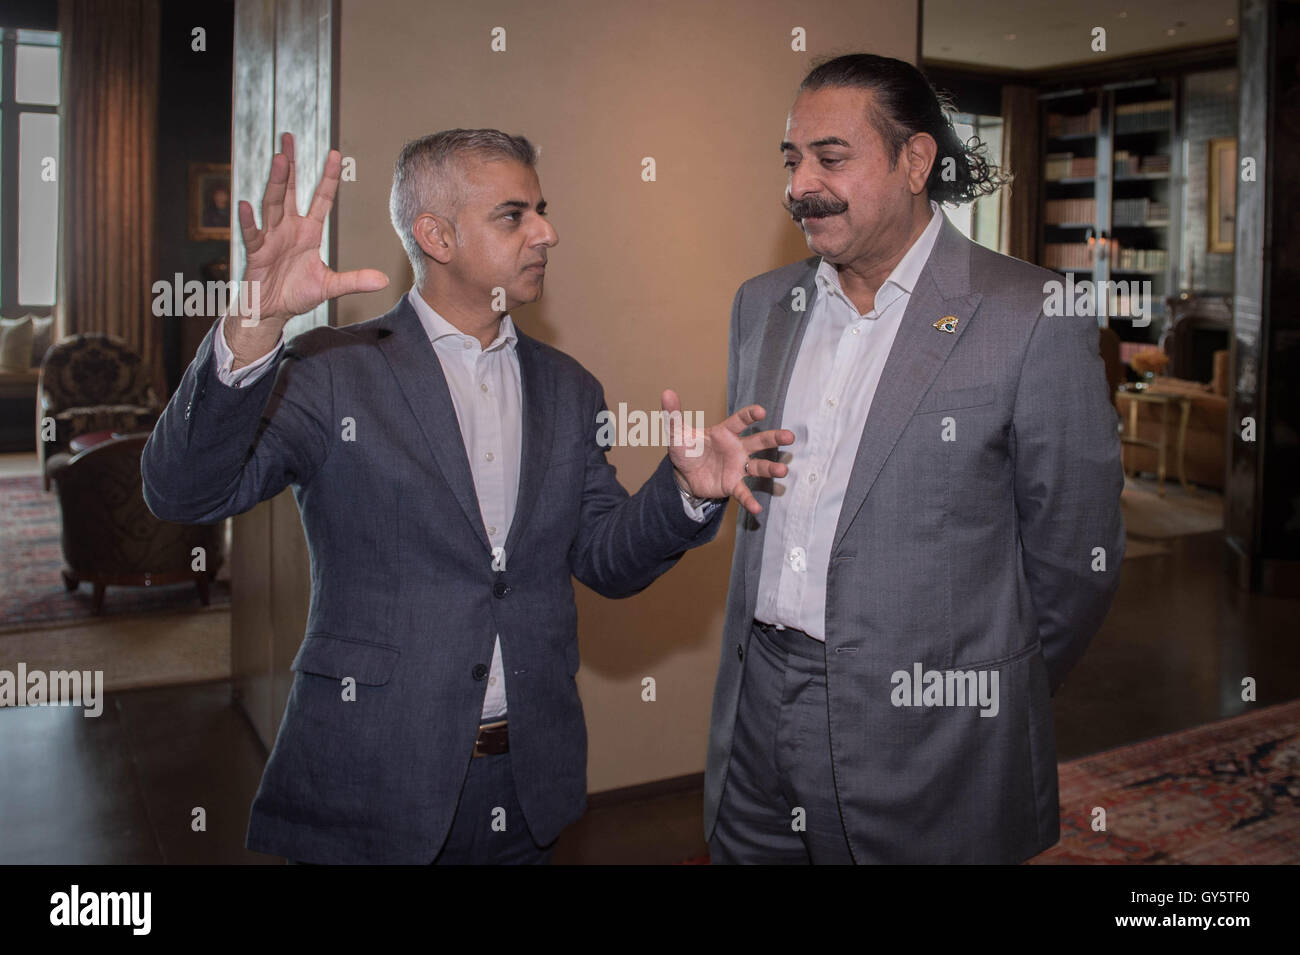 Mayor of London Sadiq Khan meets with Shahid Khan, owner of Fulham FC and  the Jacksonville Jaguars, at his apartment in Chicago where they discussed  investment in London & NFL franchise Stock